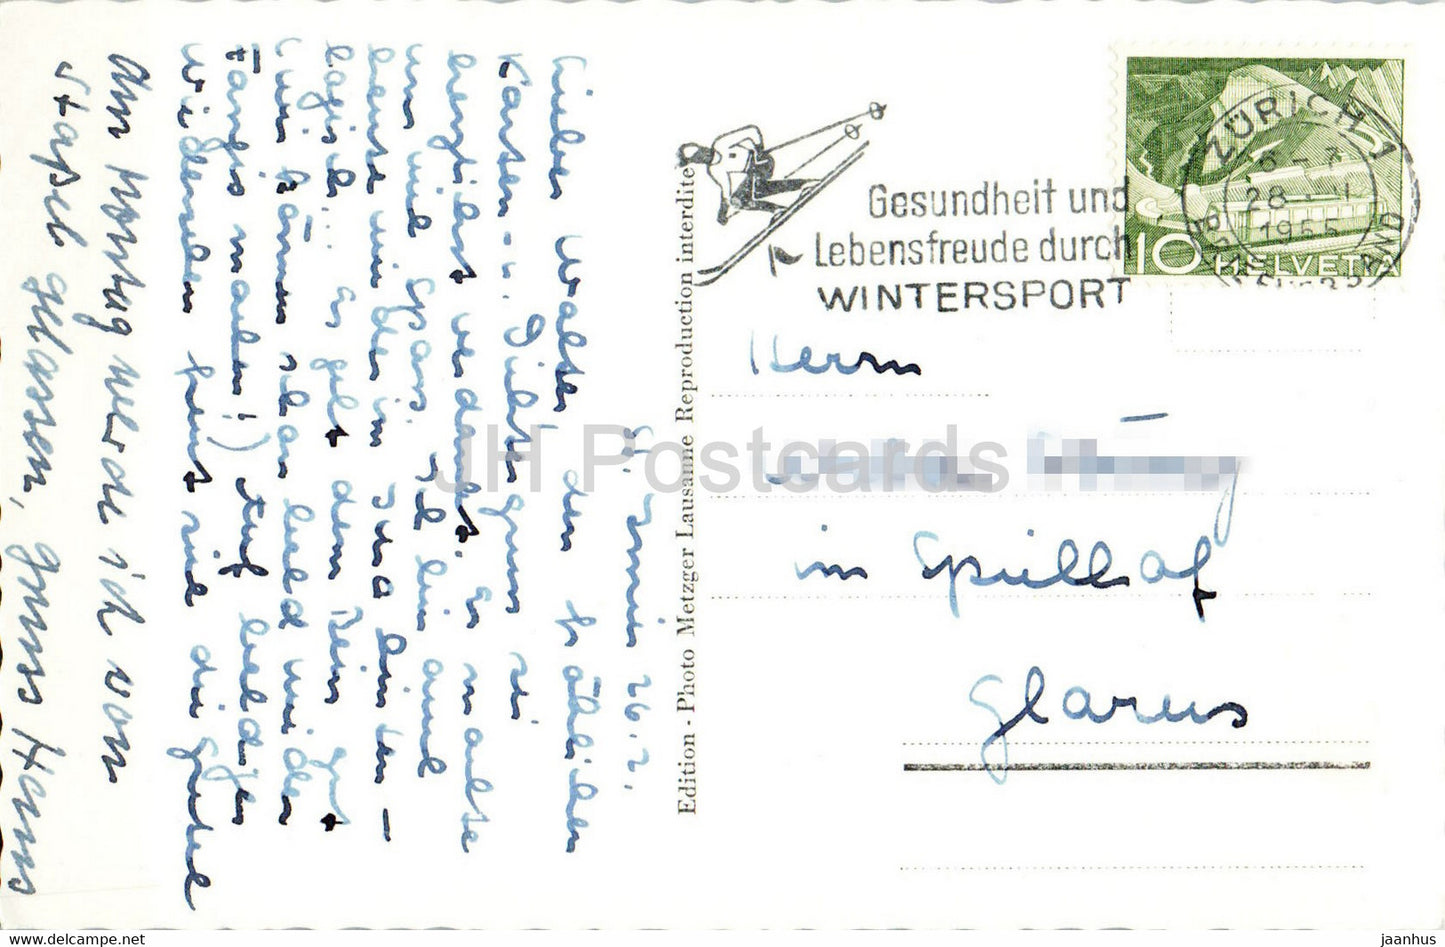 St Imier - Combe Grede et Chasseral - 2661 - old postcard - 1955 - Switzerland - used